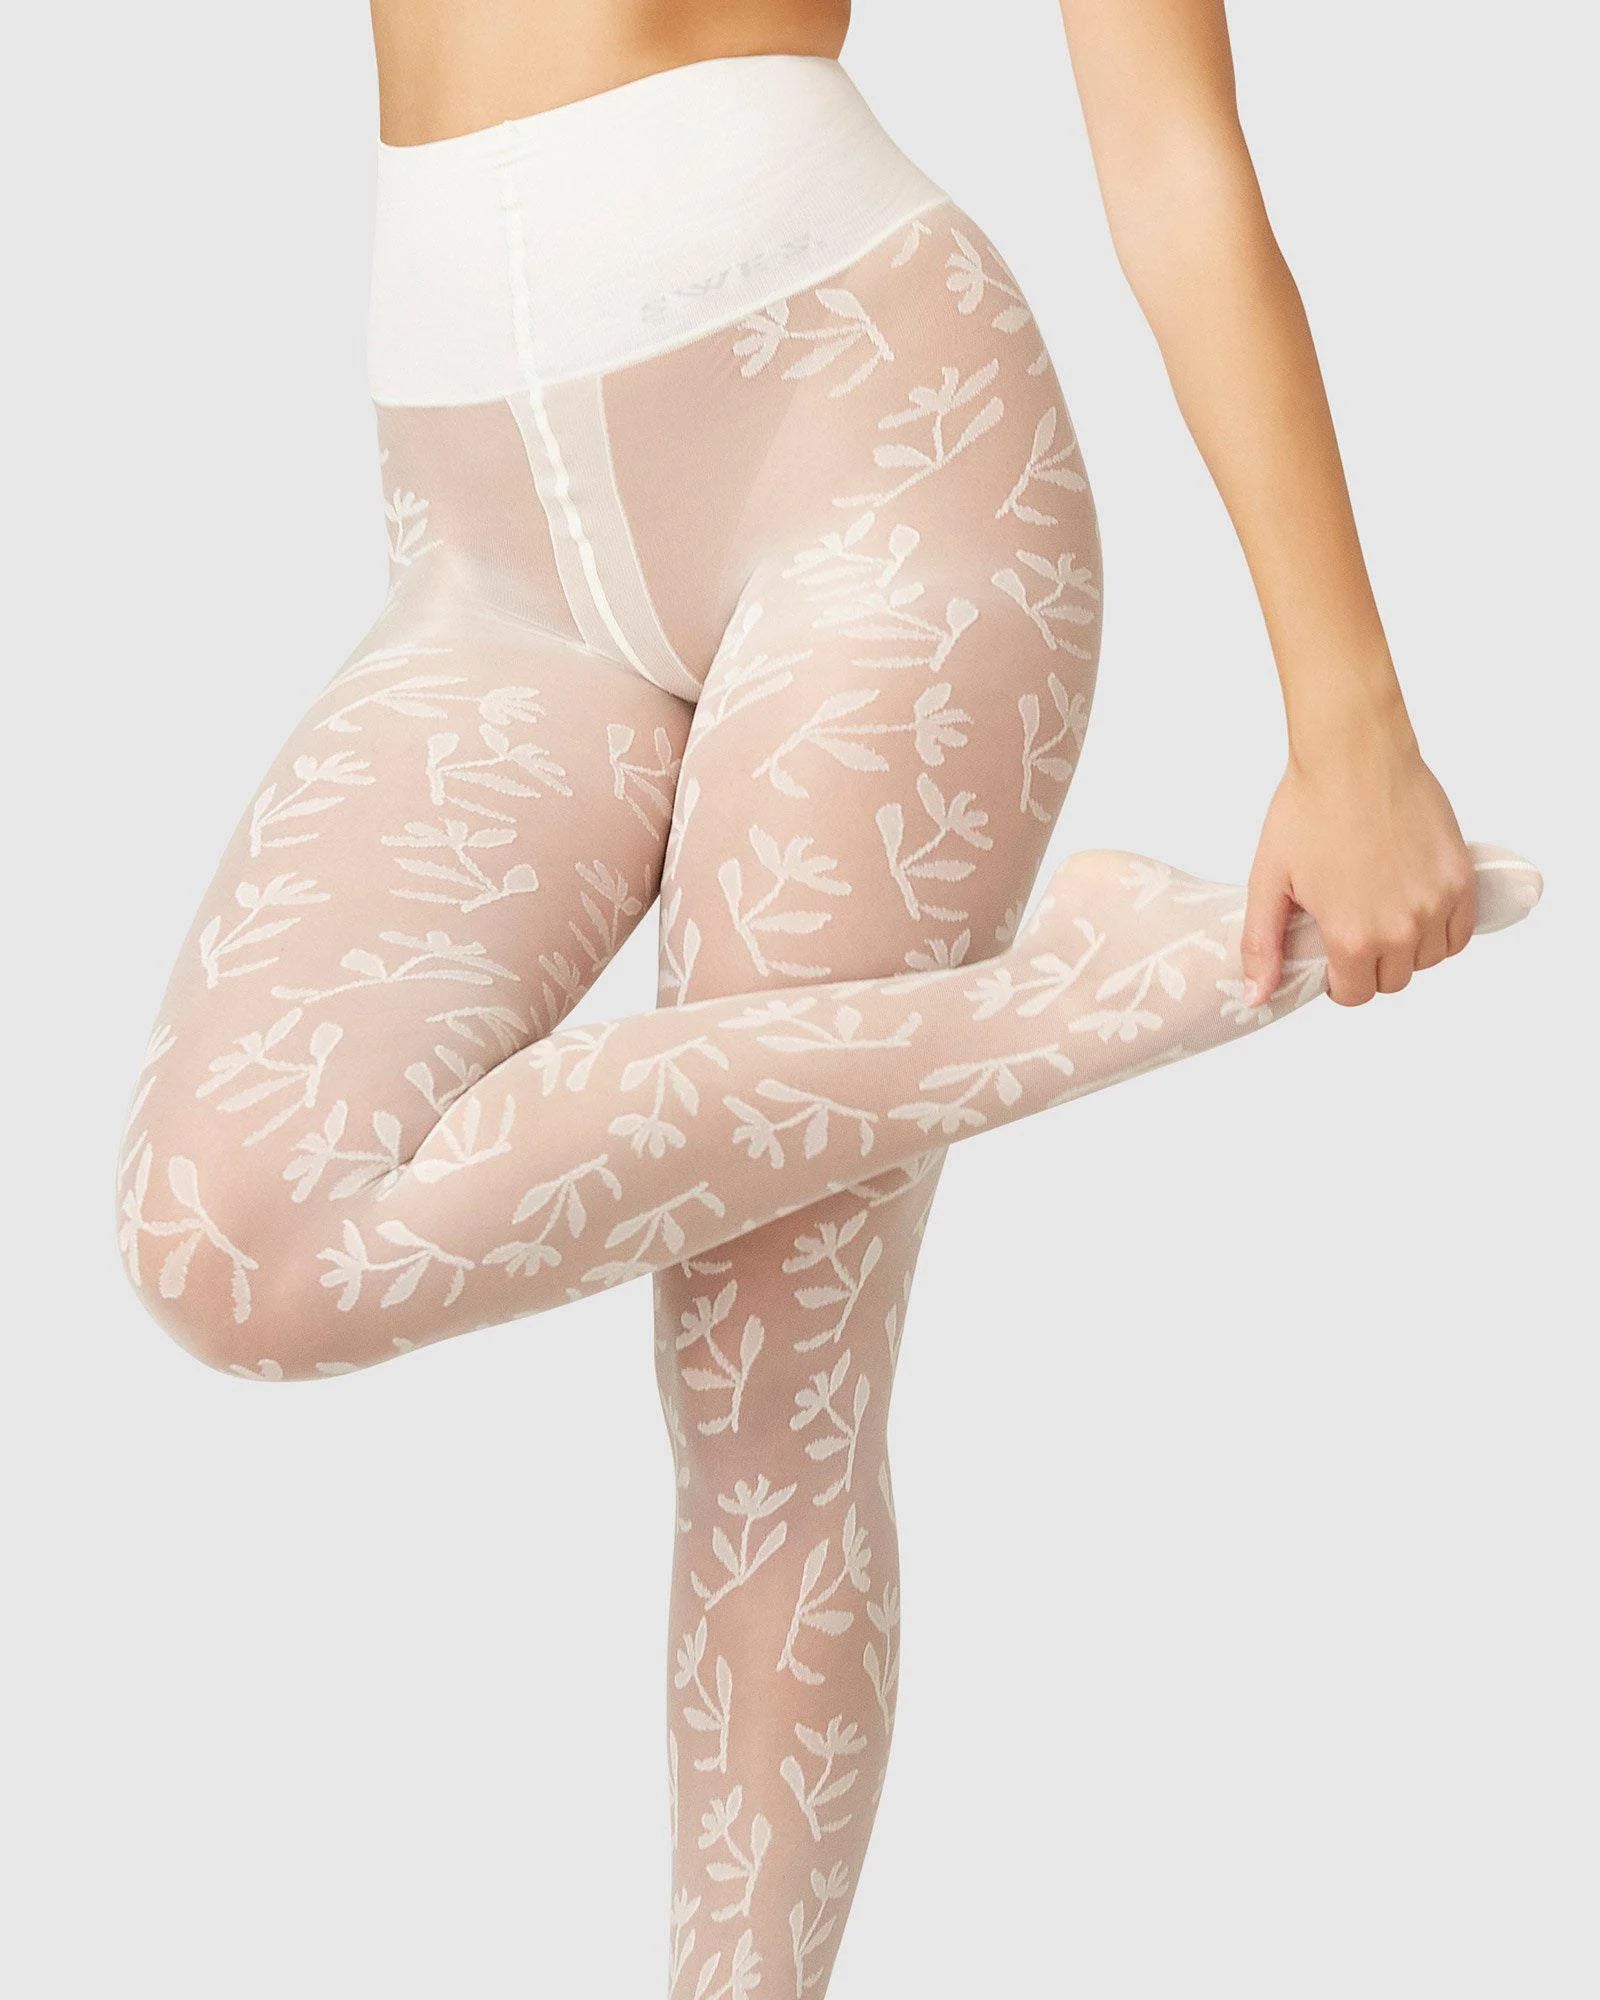 The FAIR Shop Swedish Stockings - Flora Flower Tights In Ivory